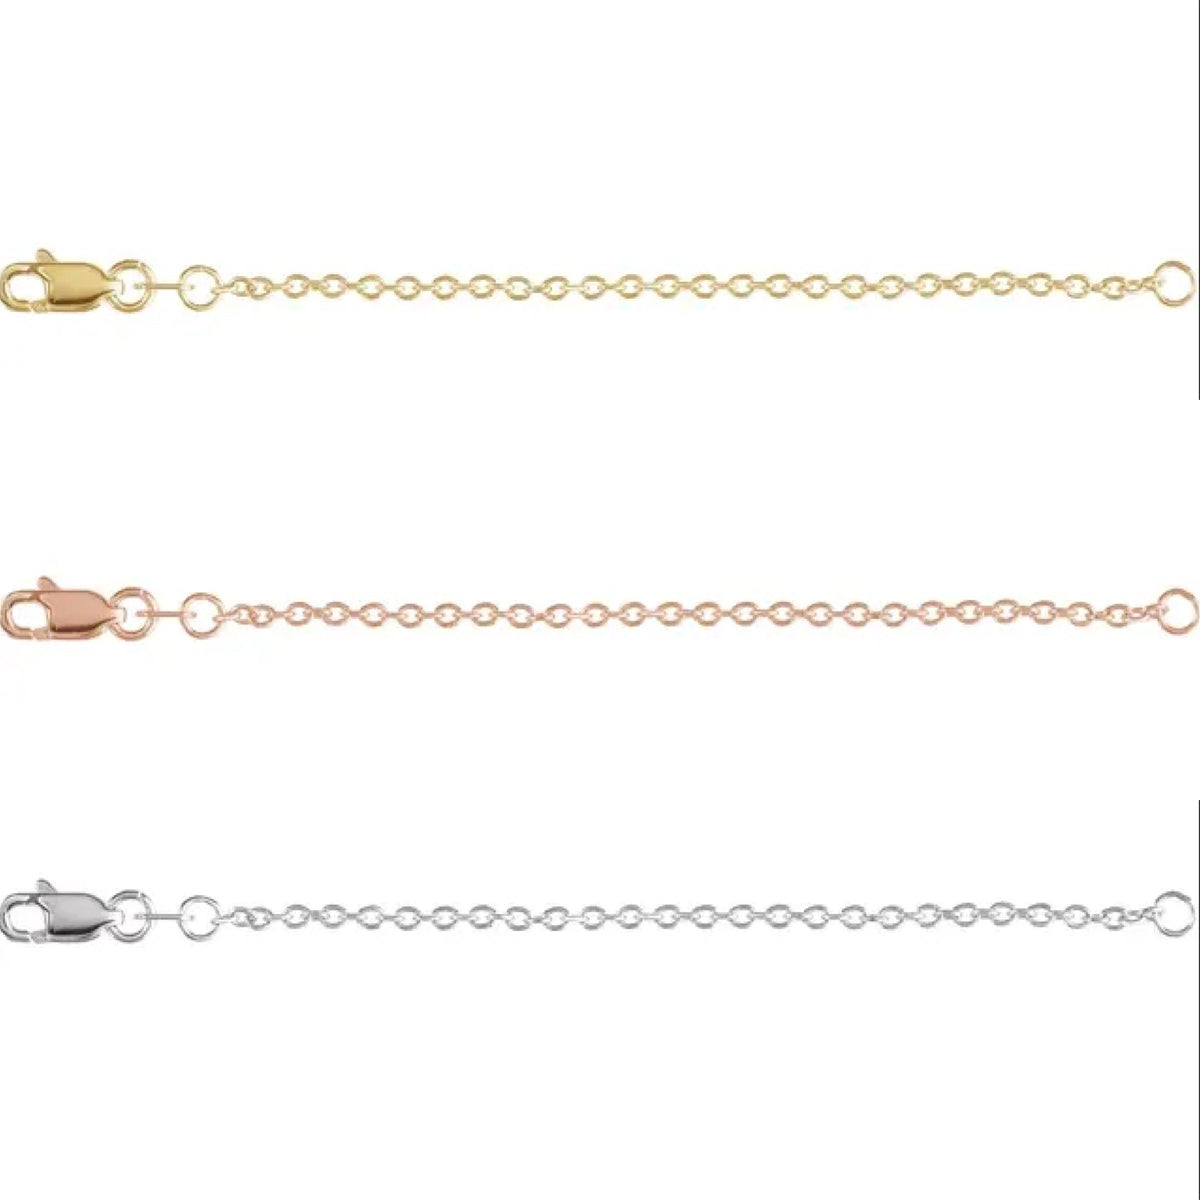  14k Solid Gold Chain Extender